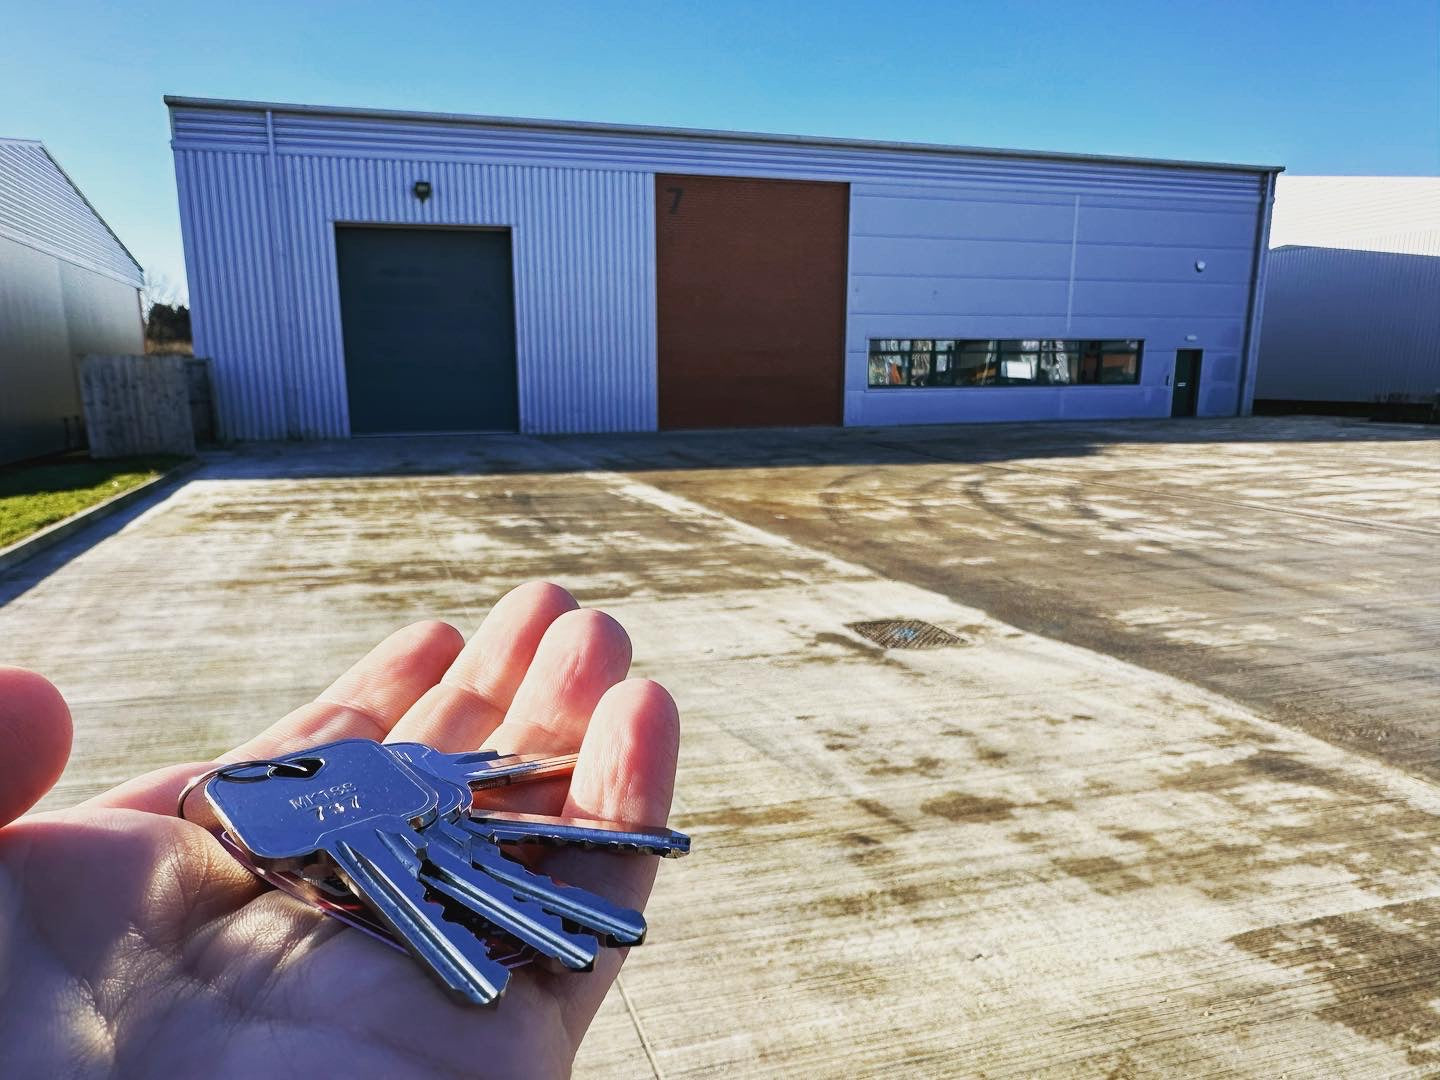 New Warehouse Premises Acquired